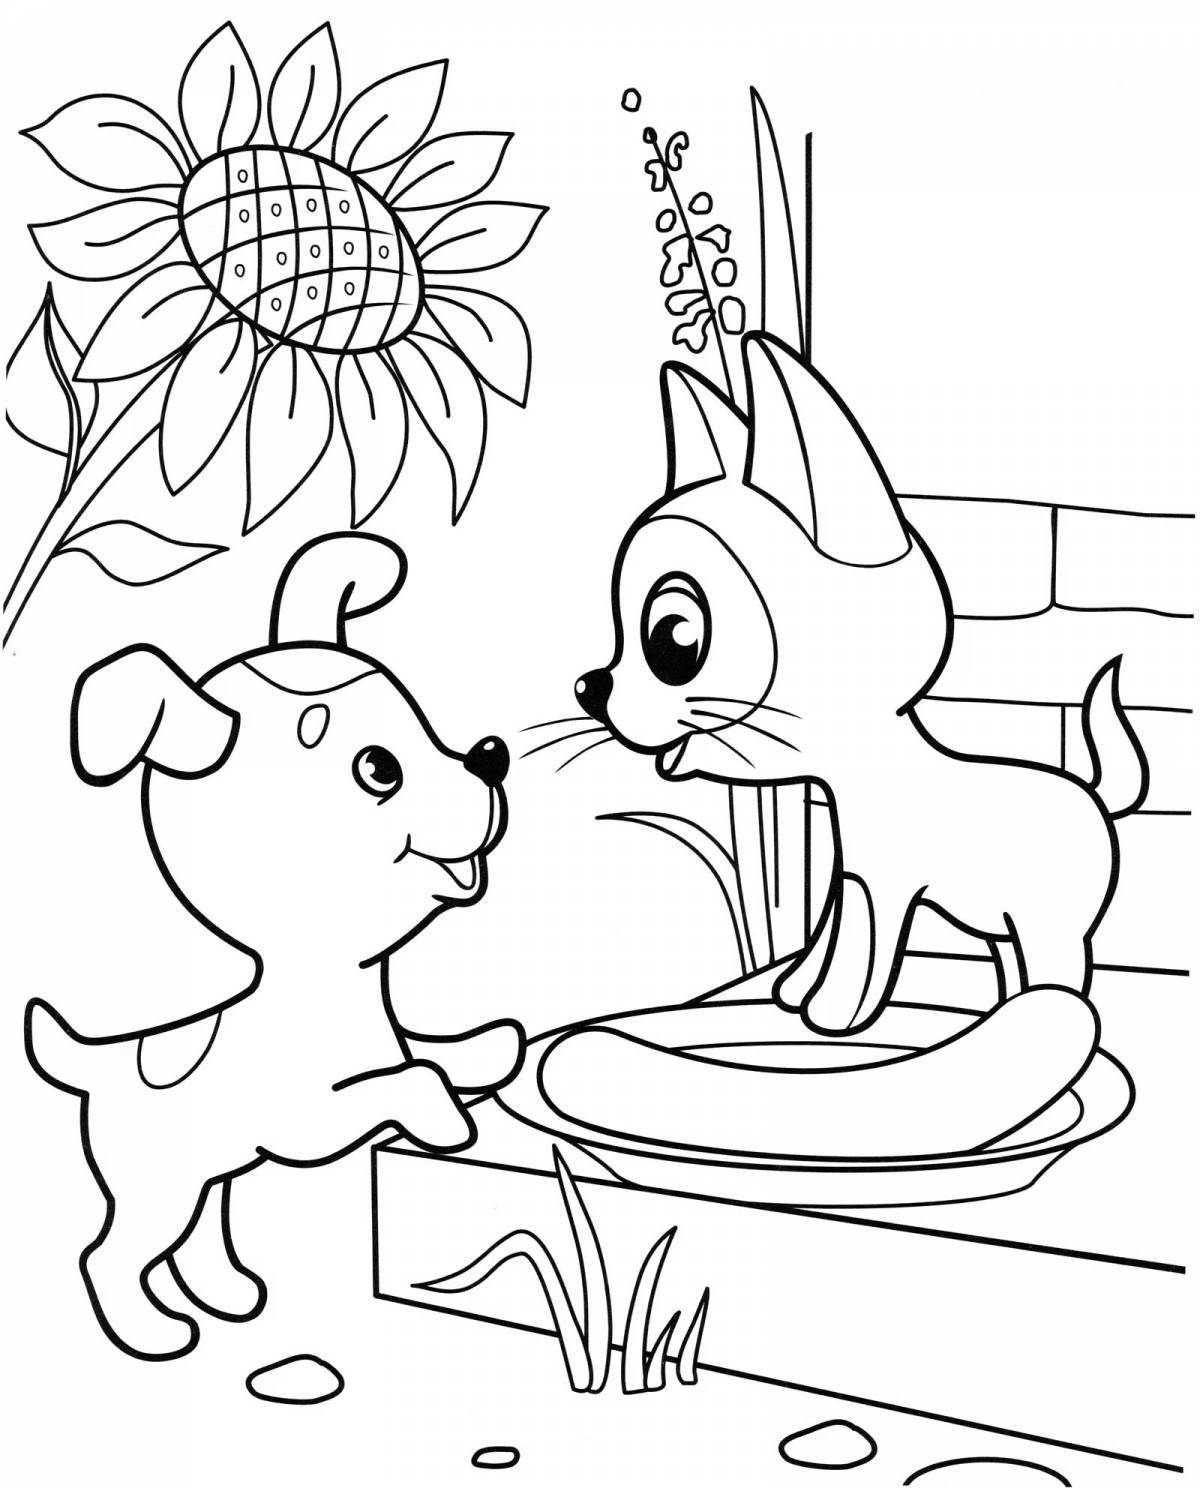 Adorable cat and dog coloring pages for kids 3 4 years old